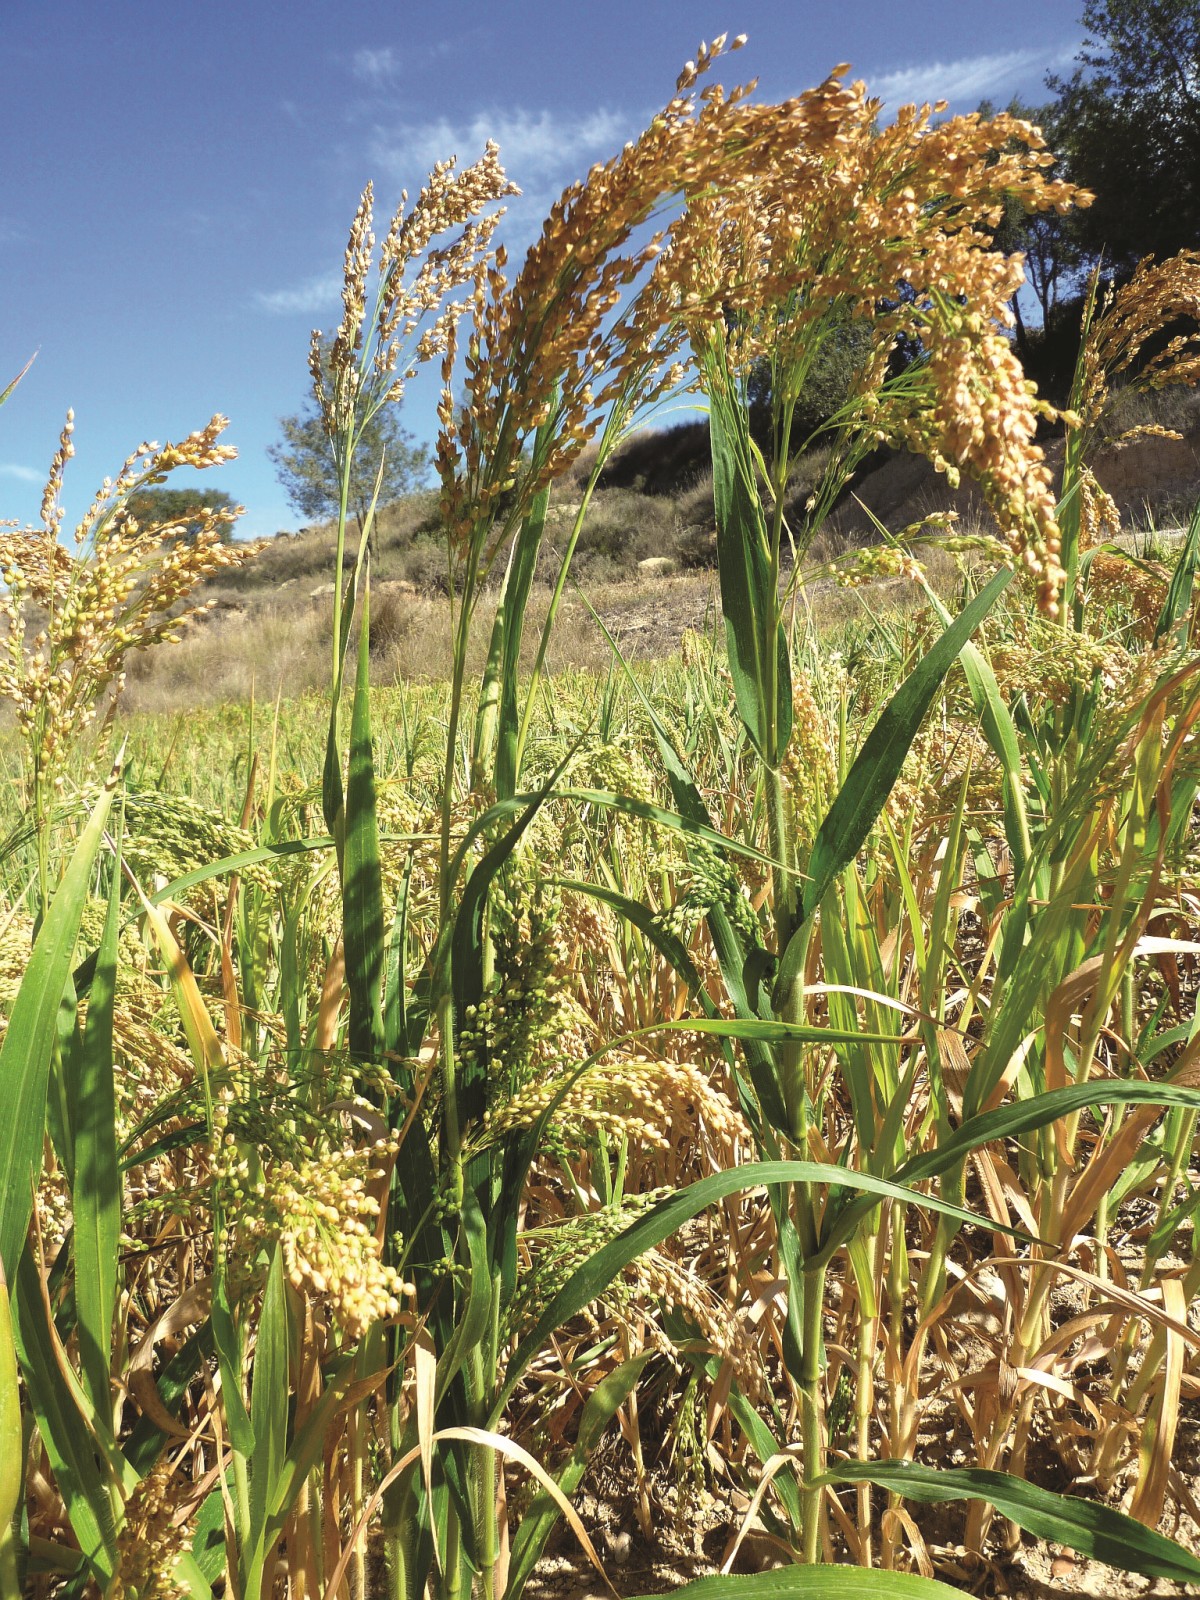 The picture shows a close-up of a field with flowering millet plants. 